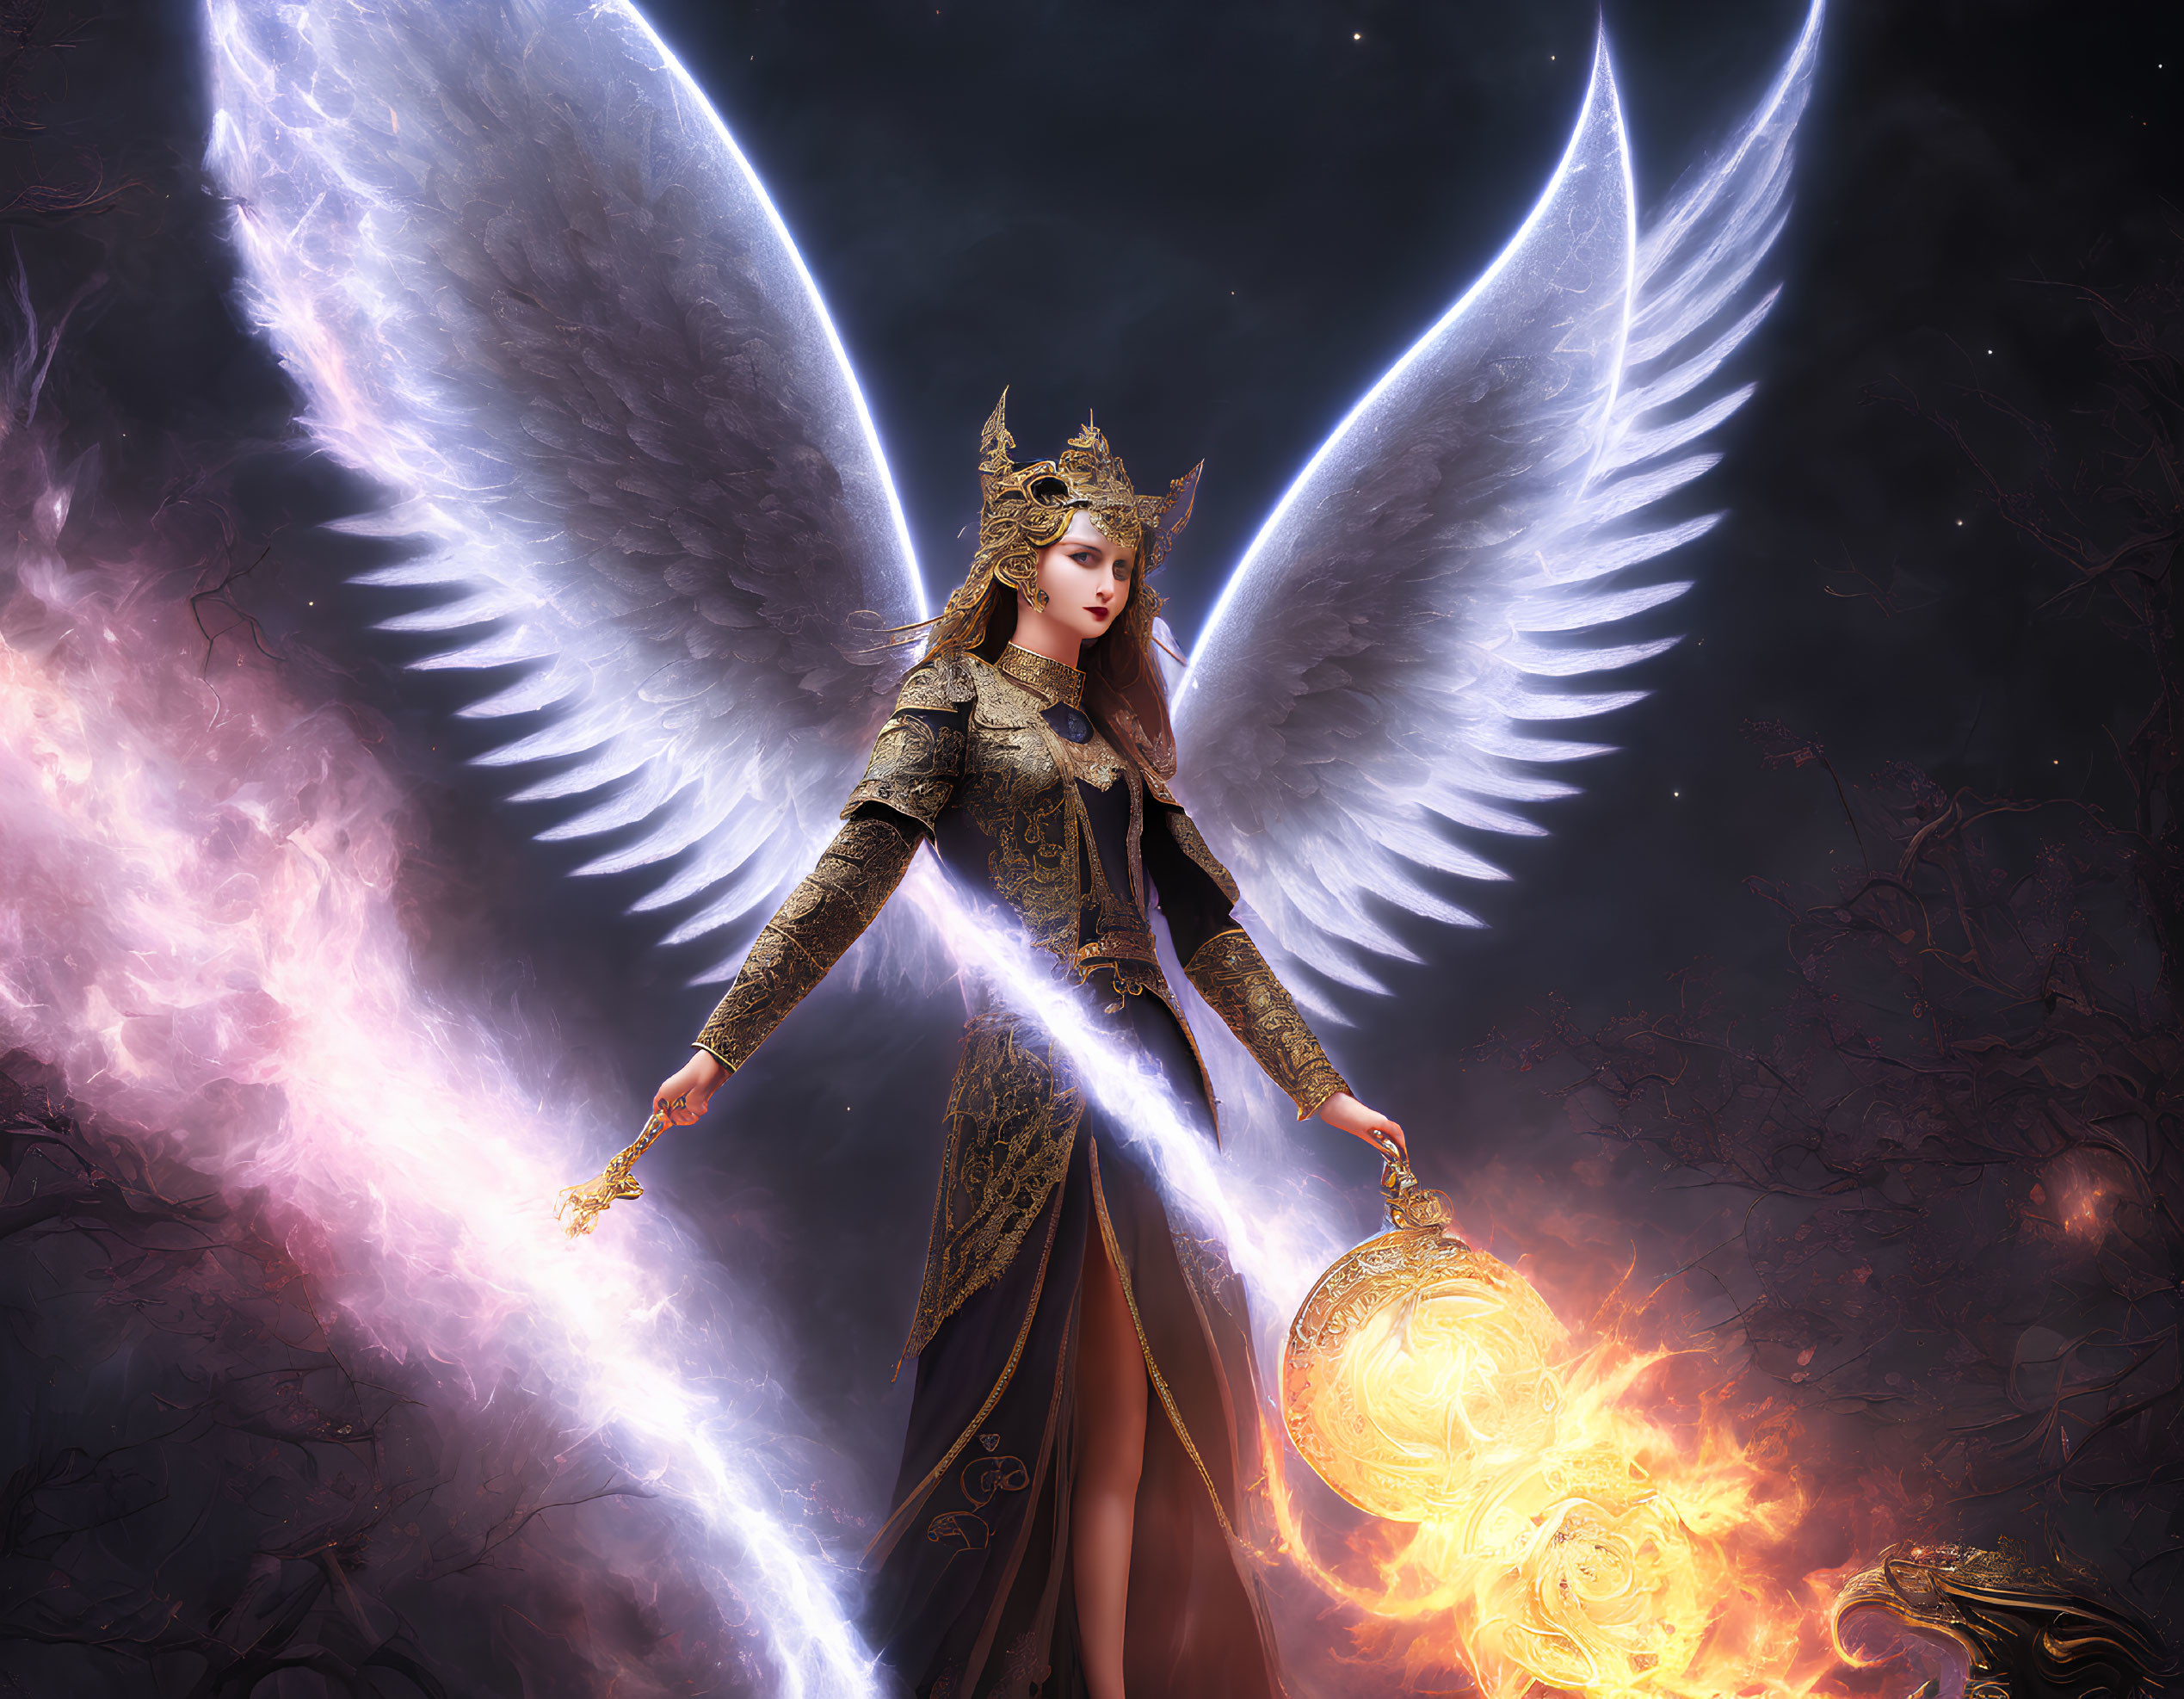 Majestic angelic figure with glowing wings and radiant sword